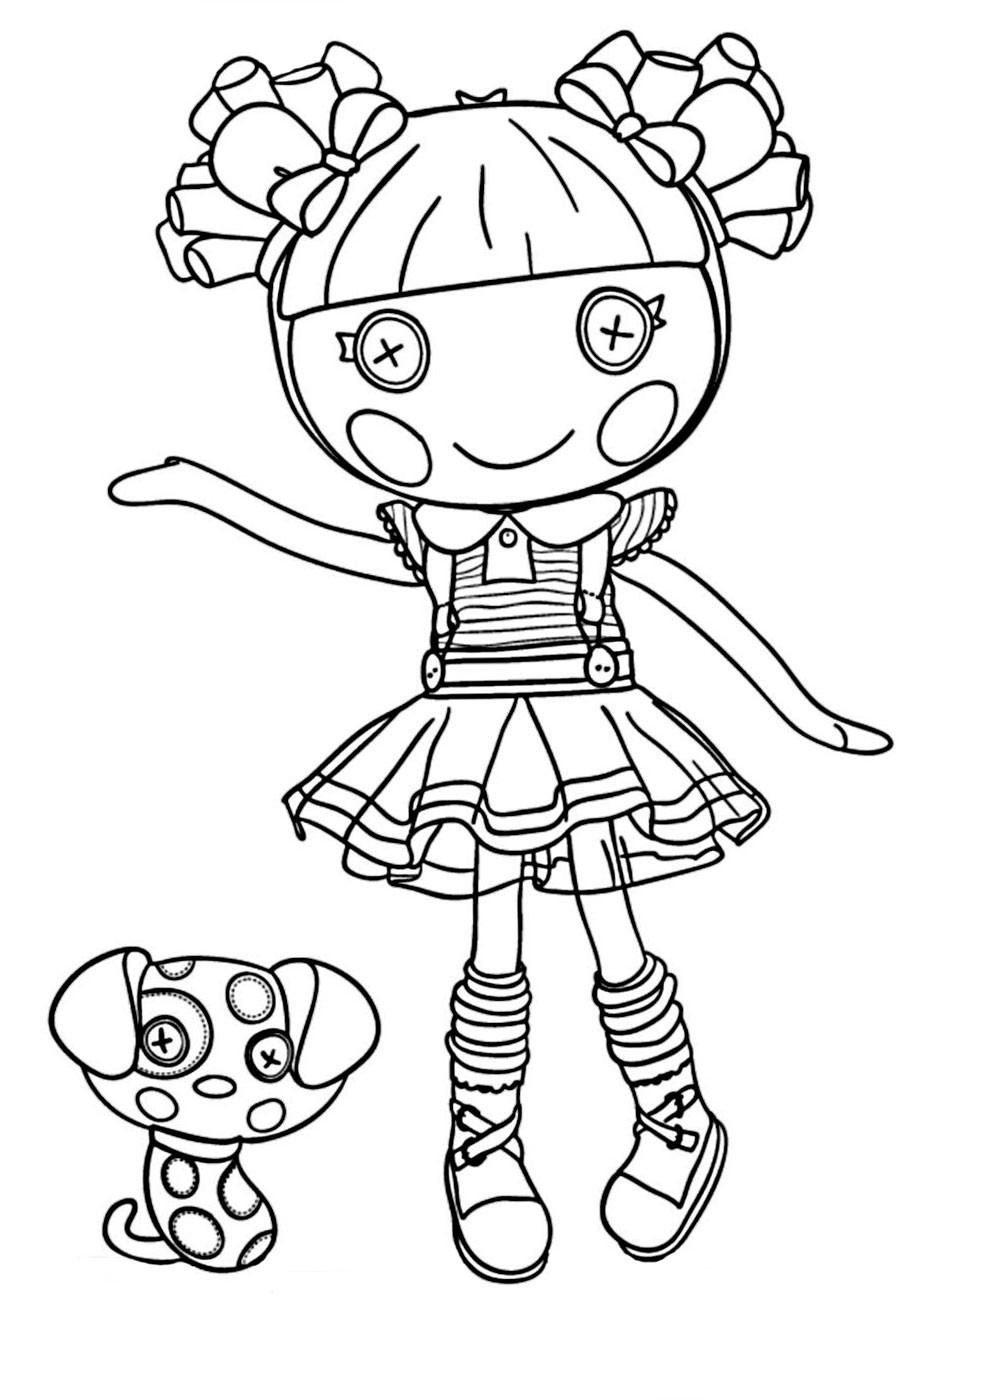 Lalaloopsy Printable Coloring Sheets
 Lalaloopsy coloring pages for girls to print for free